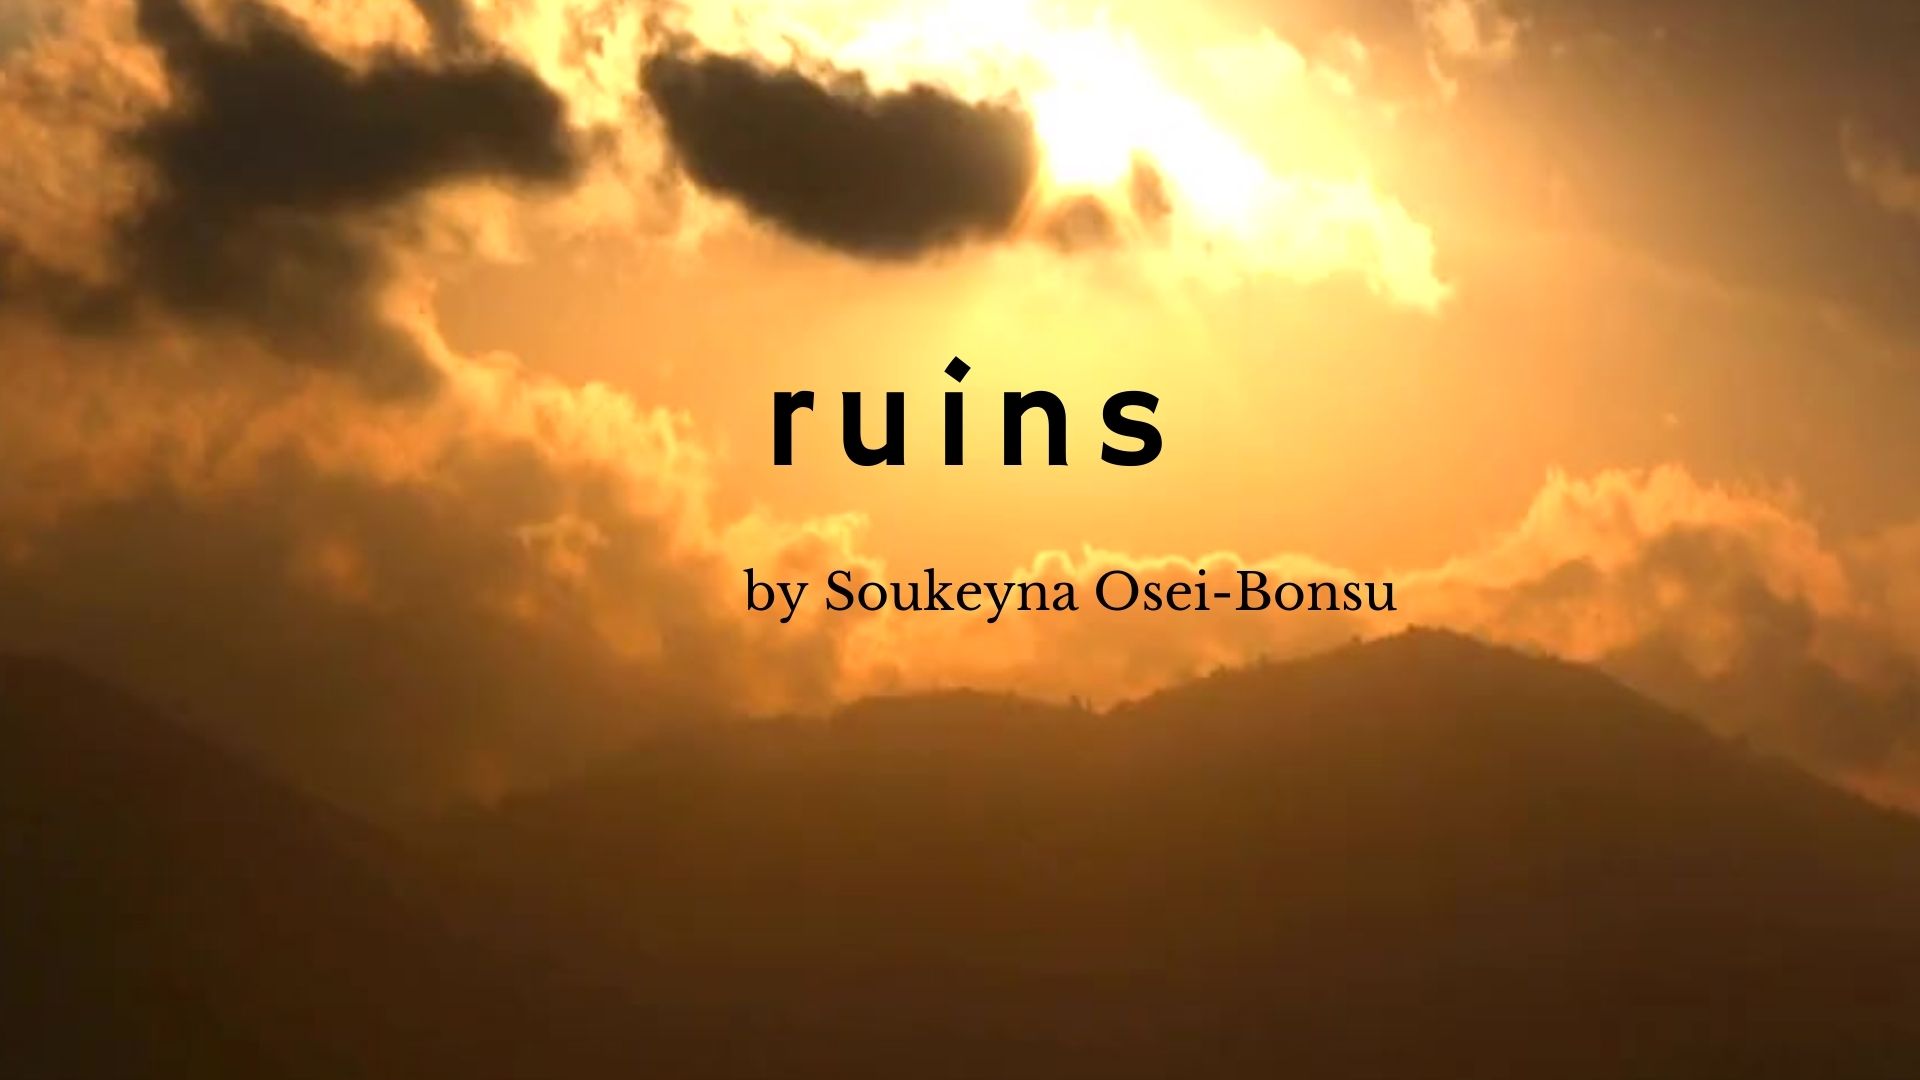 You are currently viewing ruins by Soukeyna Osei-Bonsu